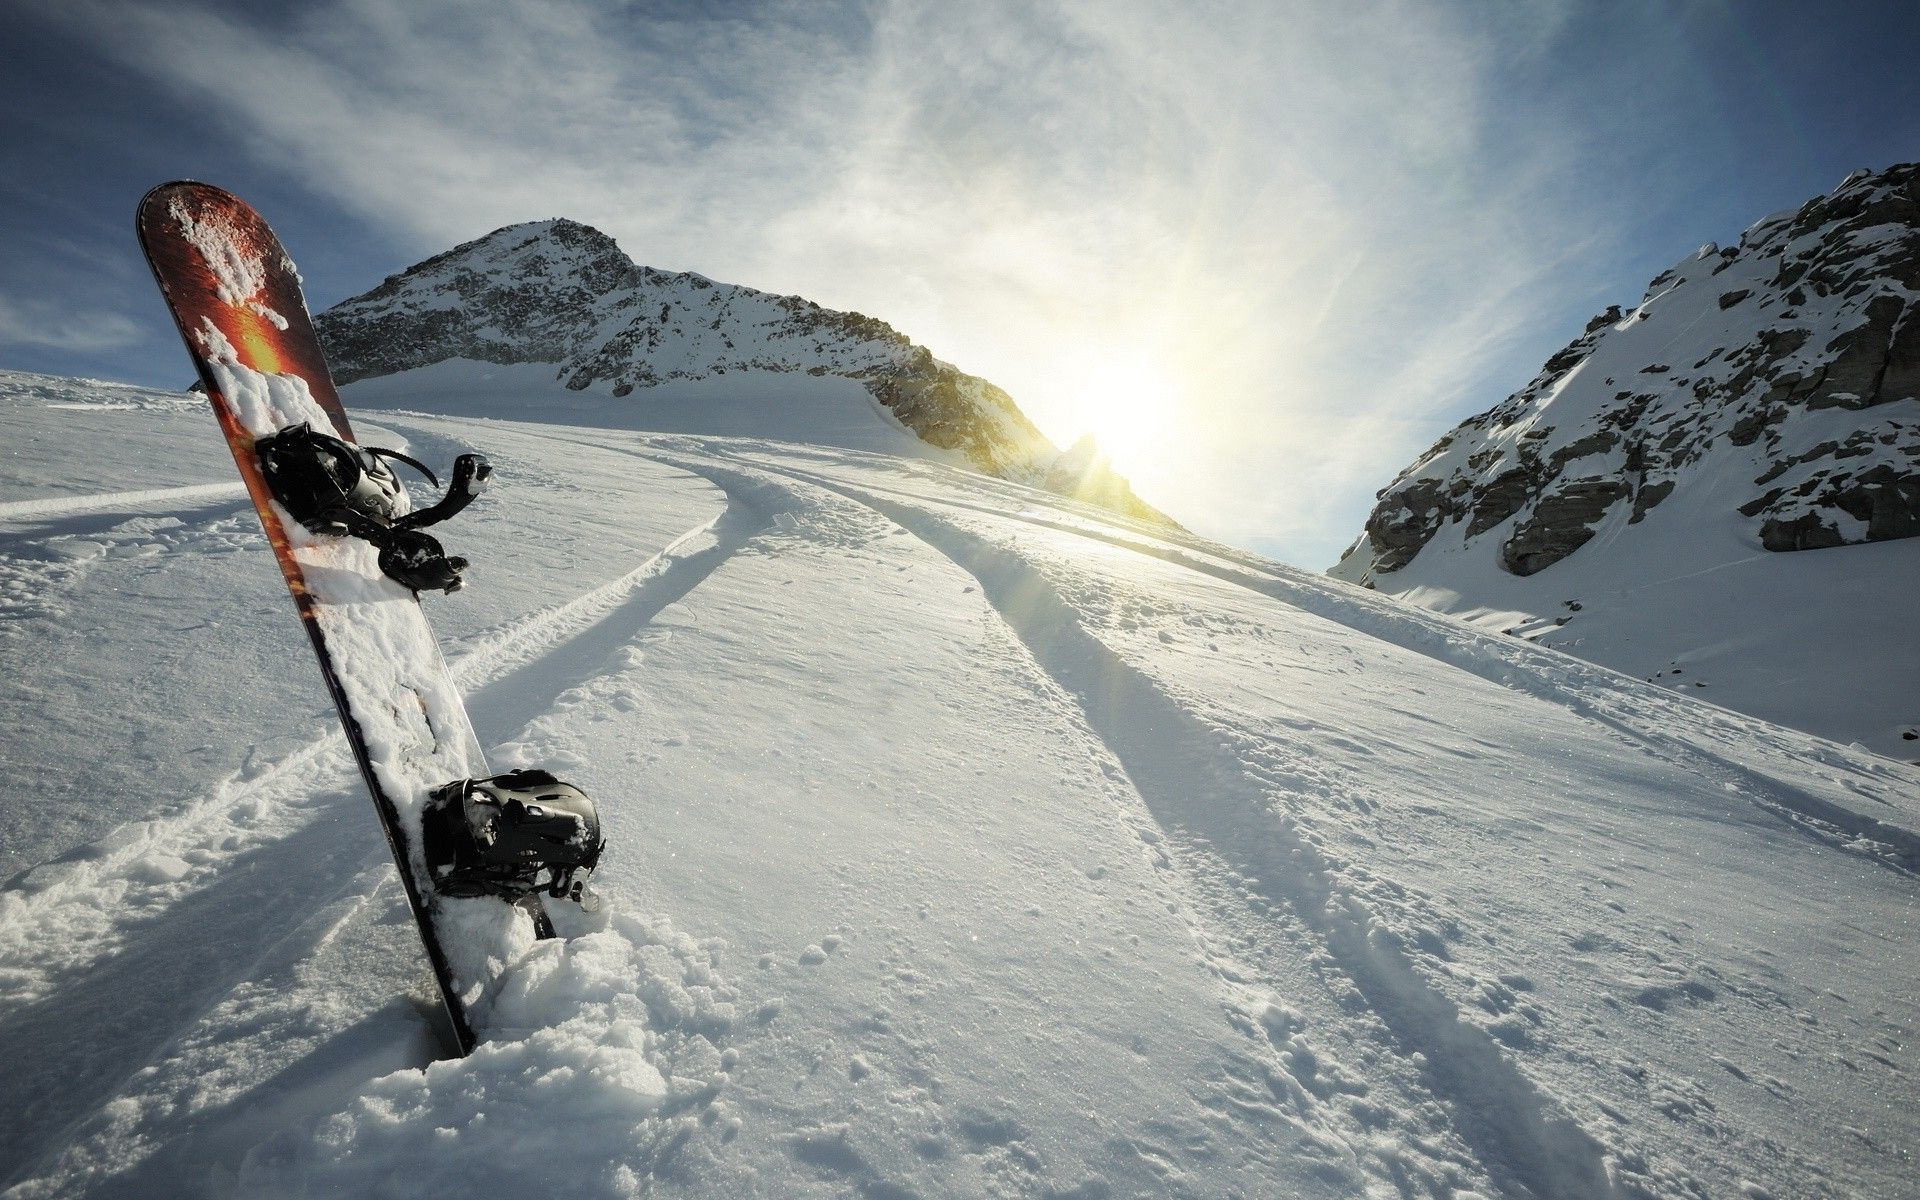 Top Burton Snowboarding Wallpaper By Images for Pinterest